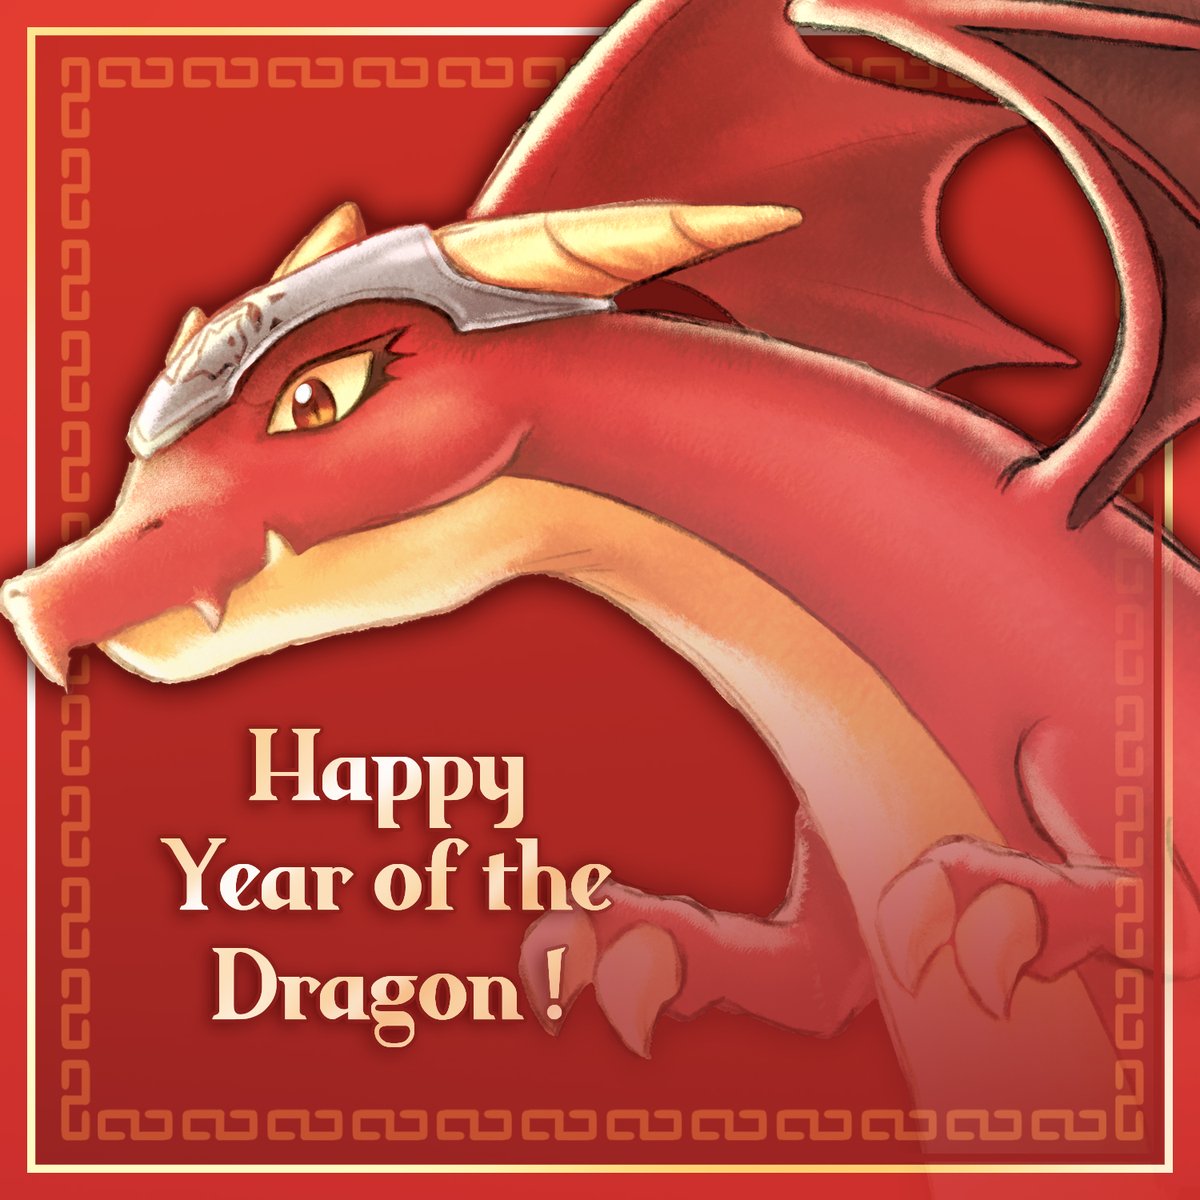 Happy Year of the Dragon!
#gamedev #roguematch #roguelike #indiegames #match3